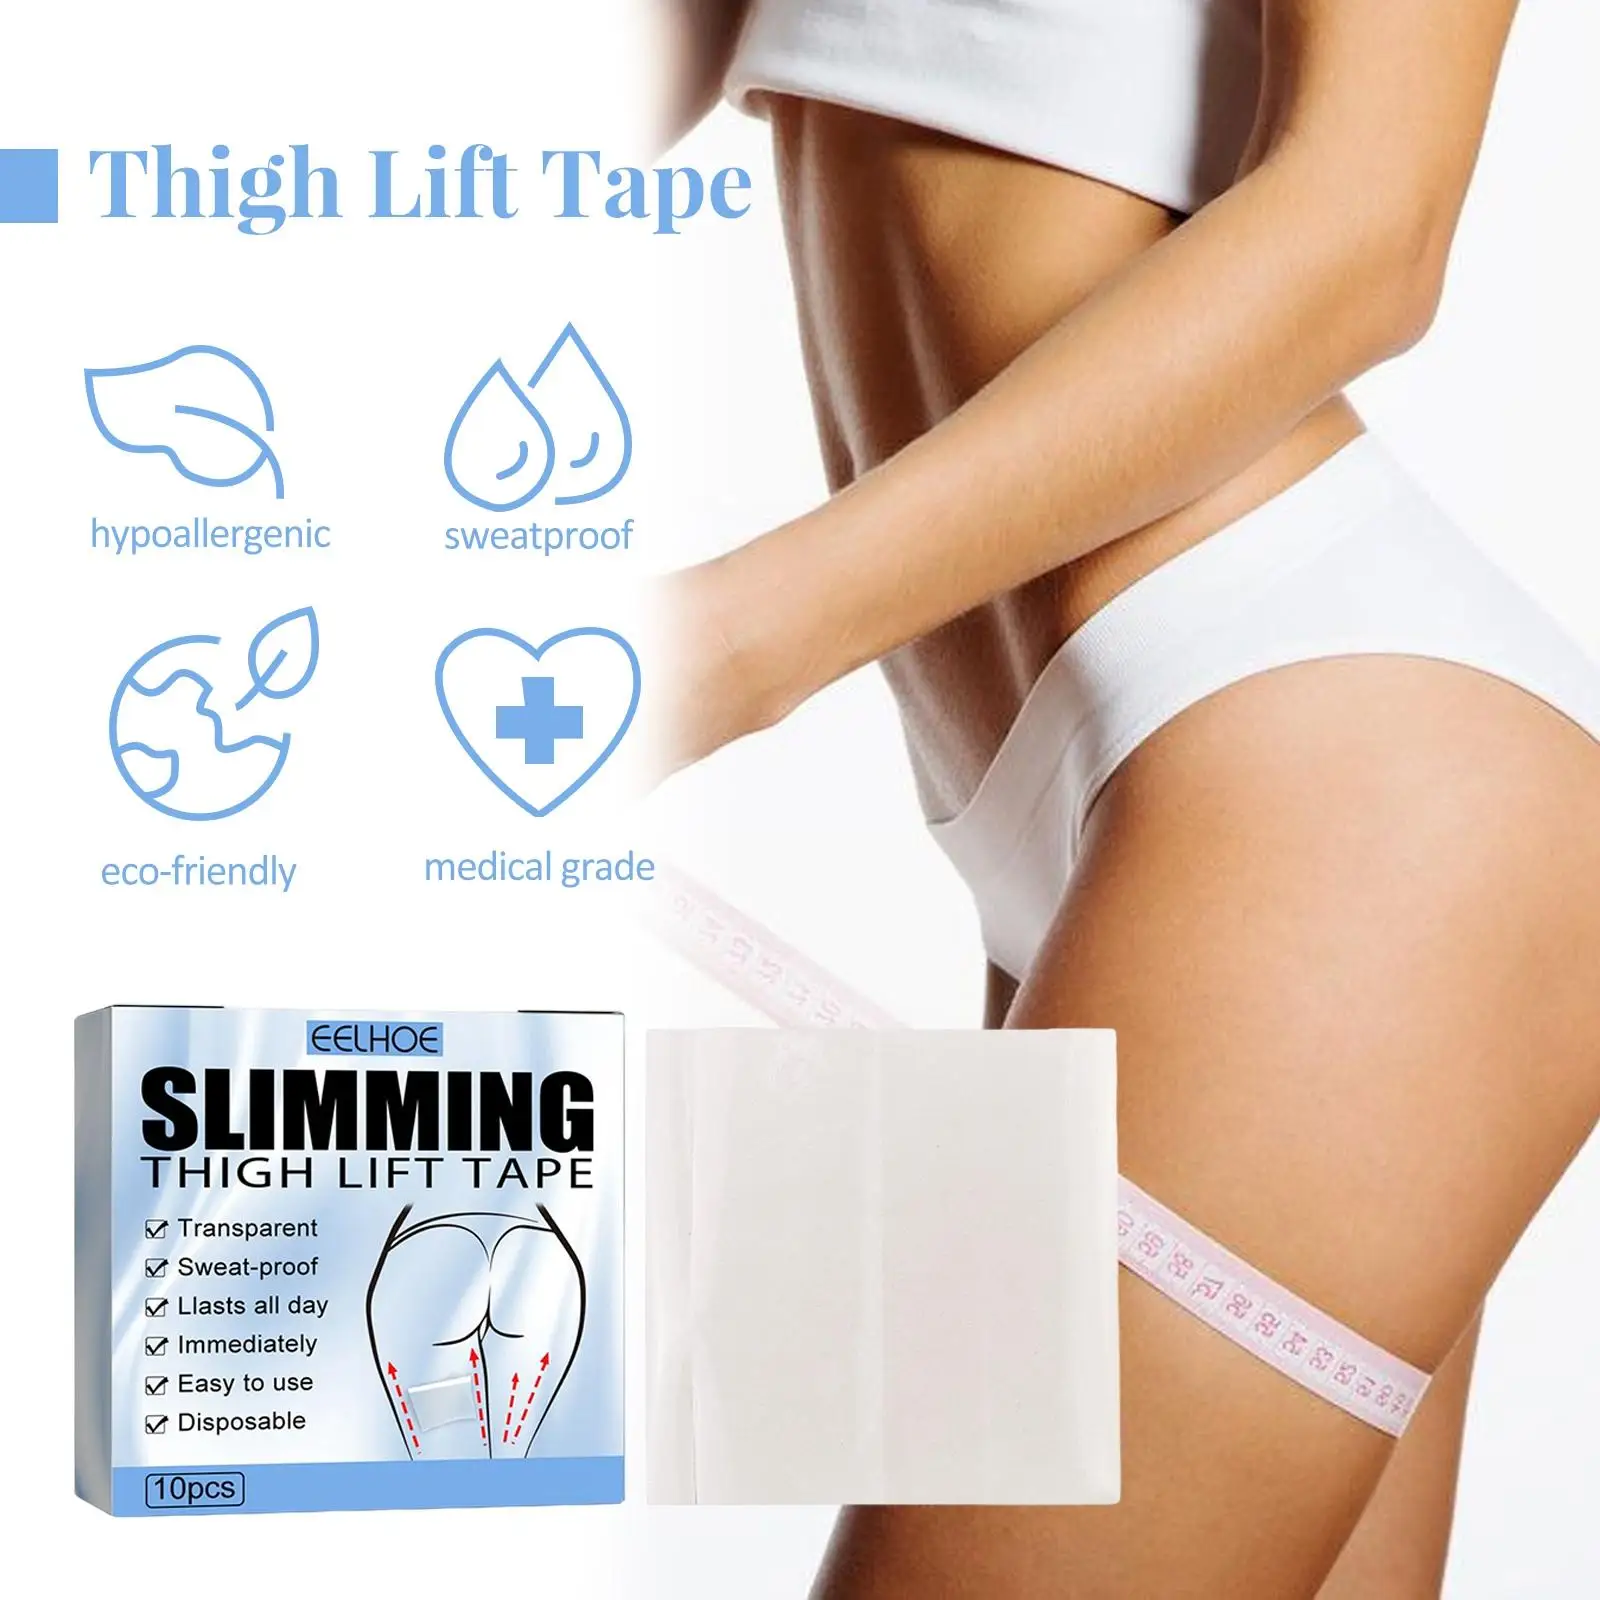 10x Thigh Lift Tape Sweatproof Instantly Lift Transparent Sticker Paste Lifts Cellulite & Sagging Skin On Thighs Tight Firm Legs